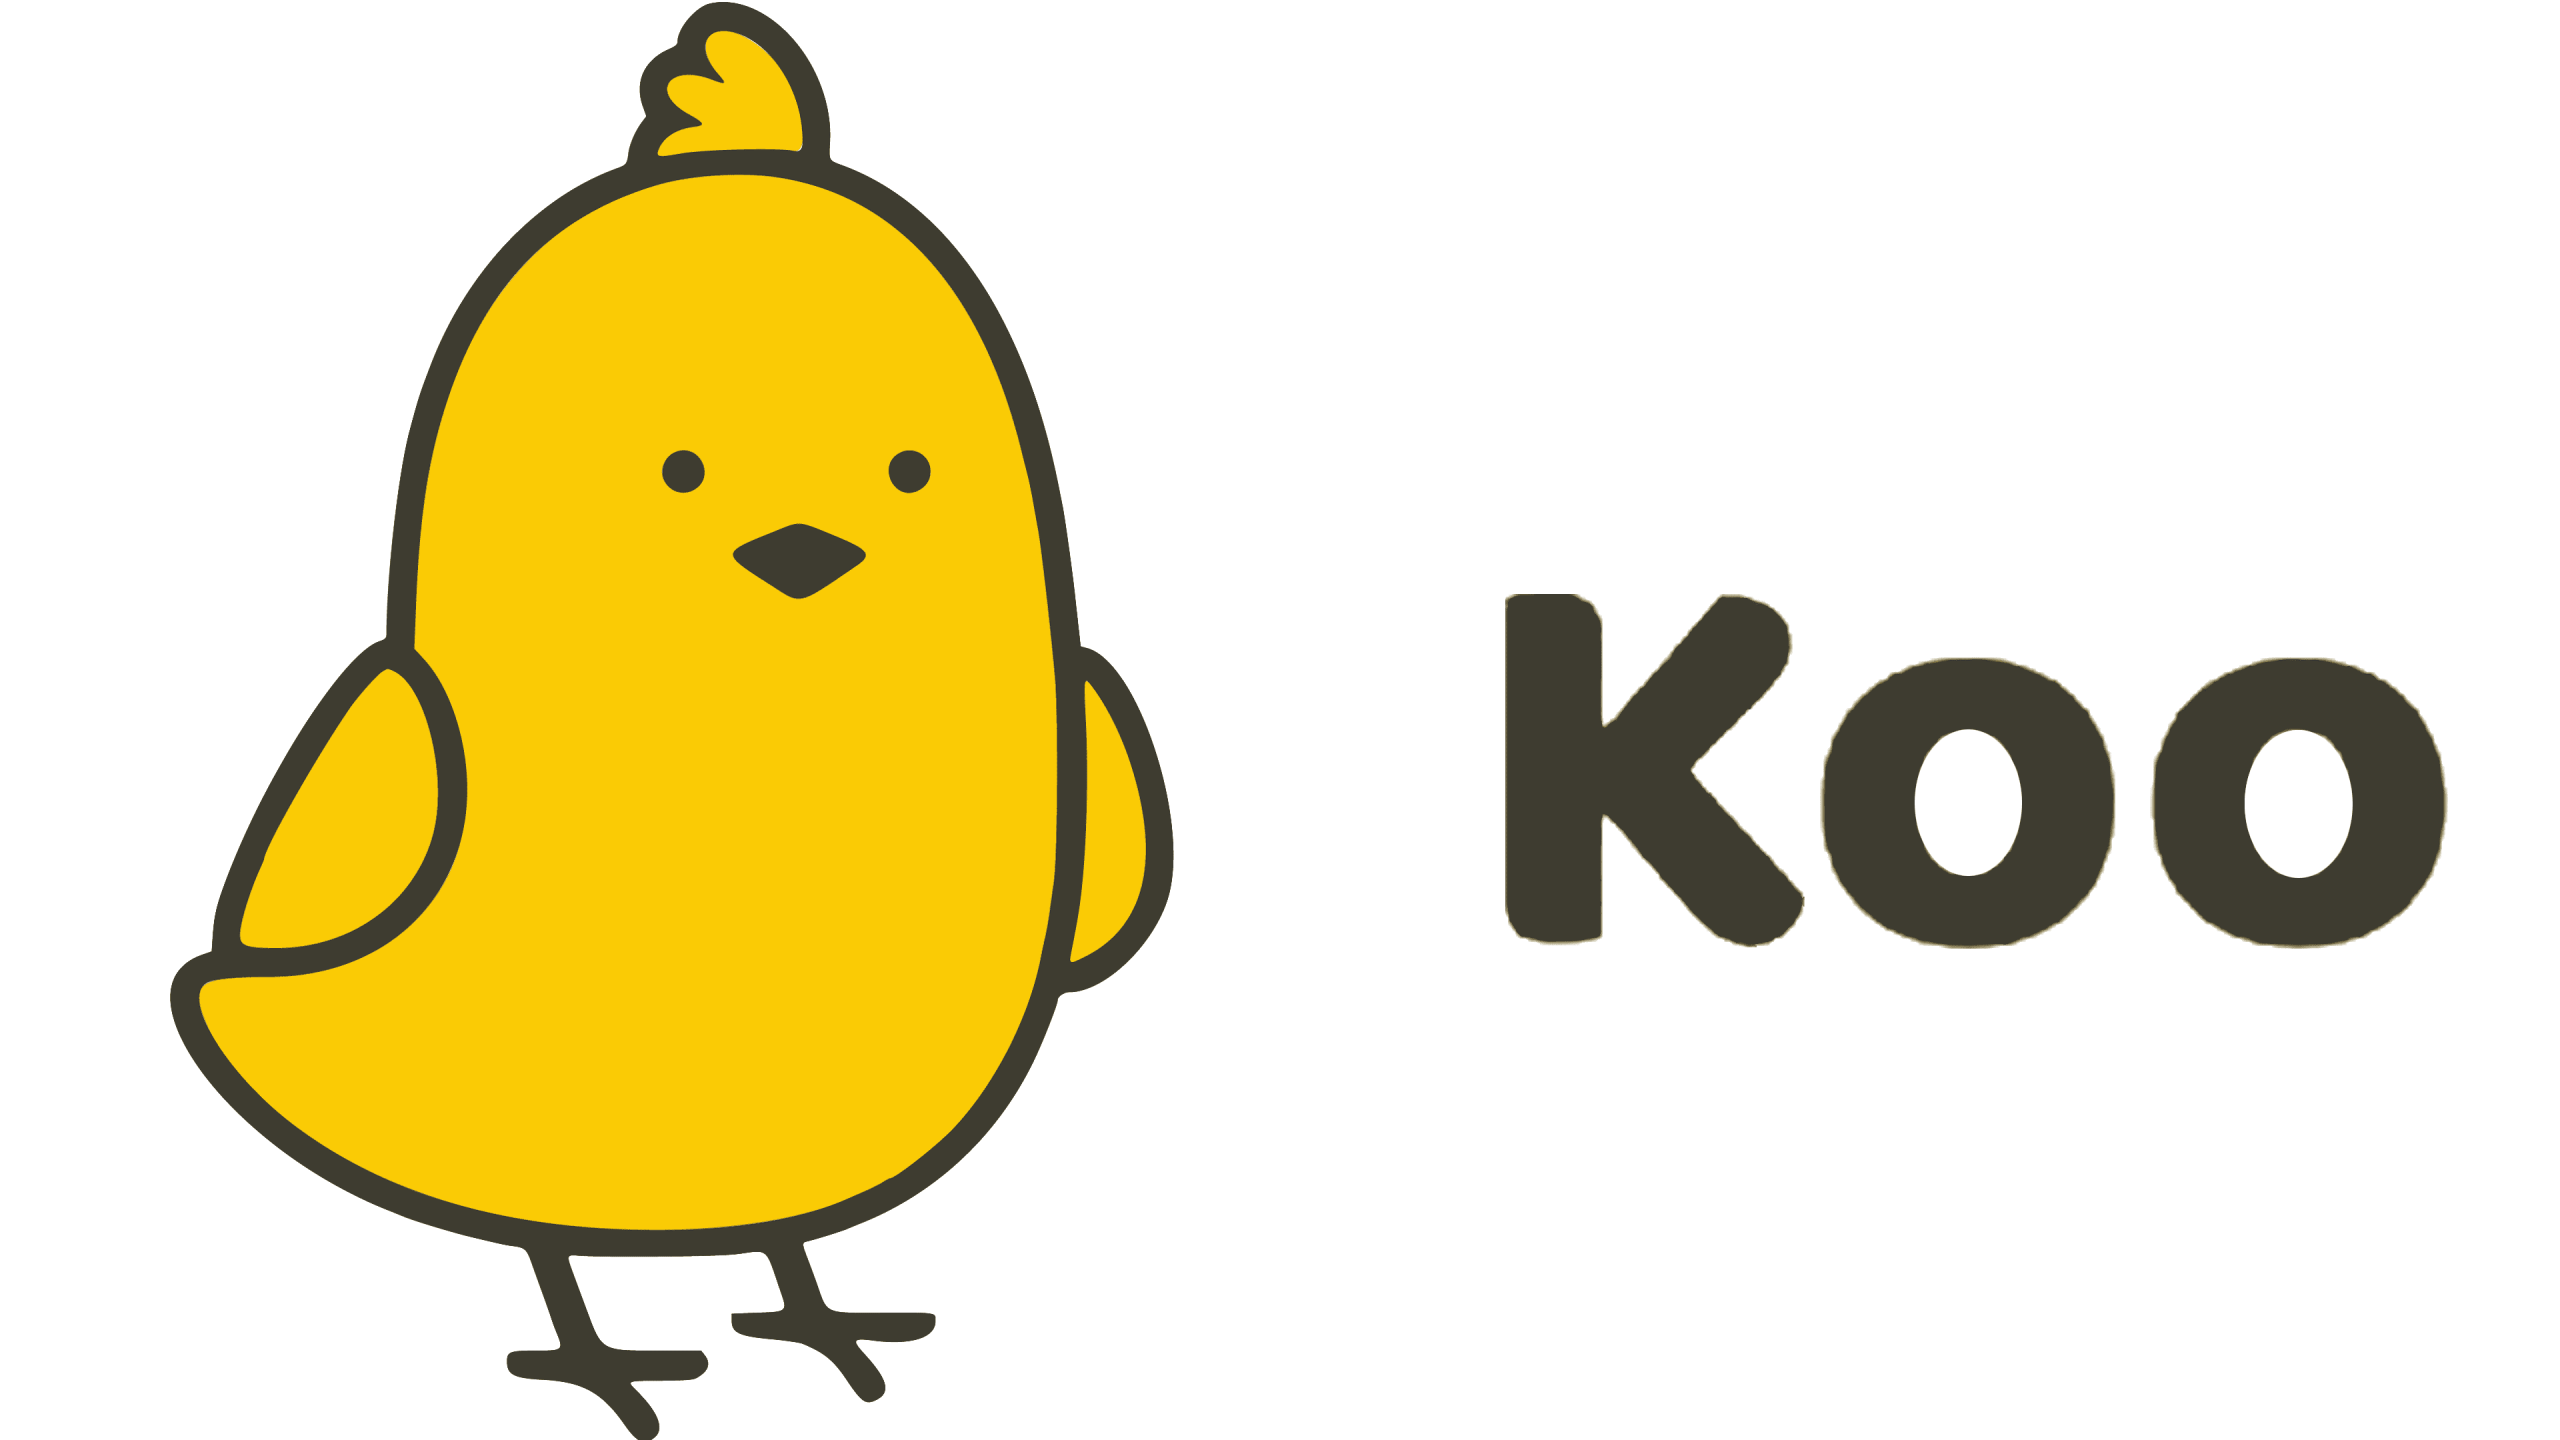 Koo An Indian Social Media App Aiming To Rival Twitter Integrates Chatgpt